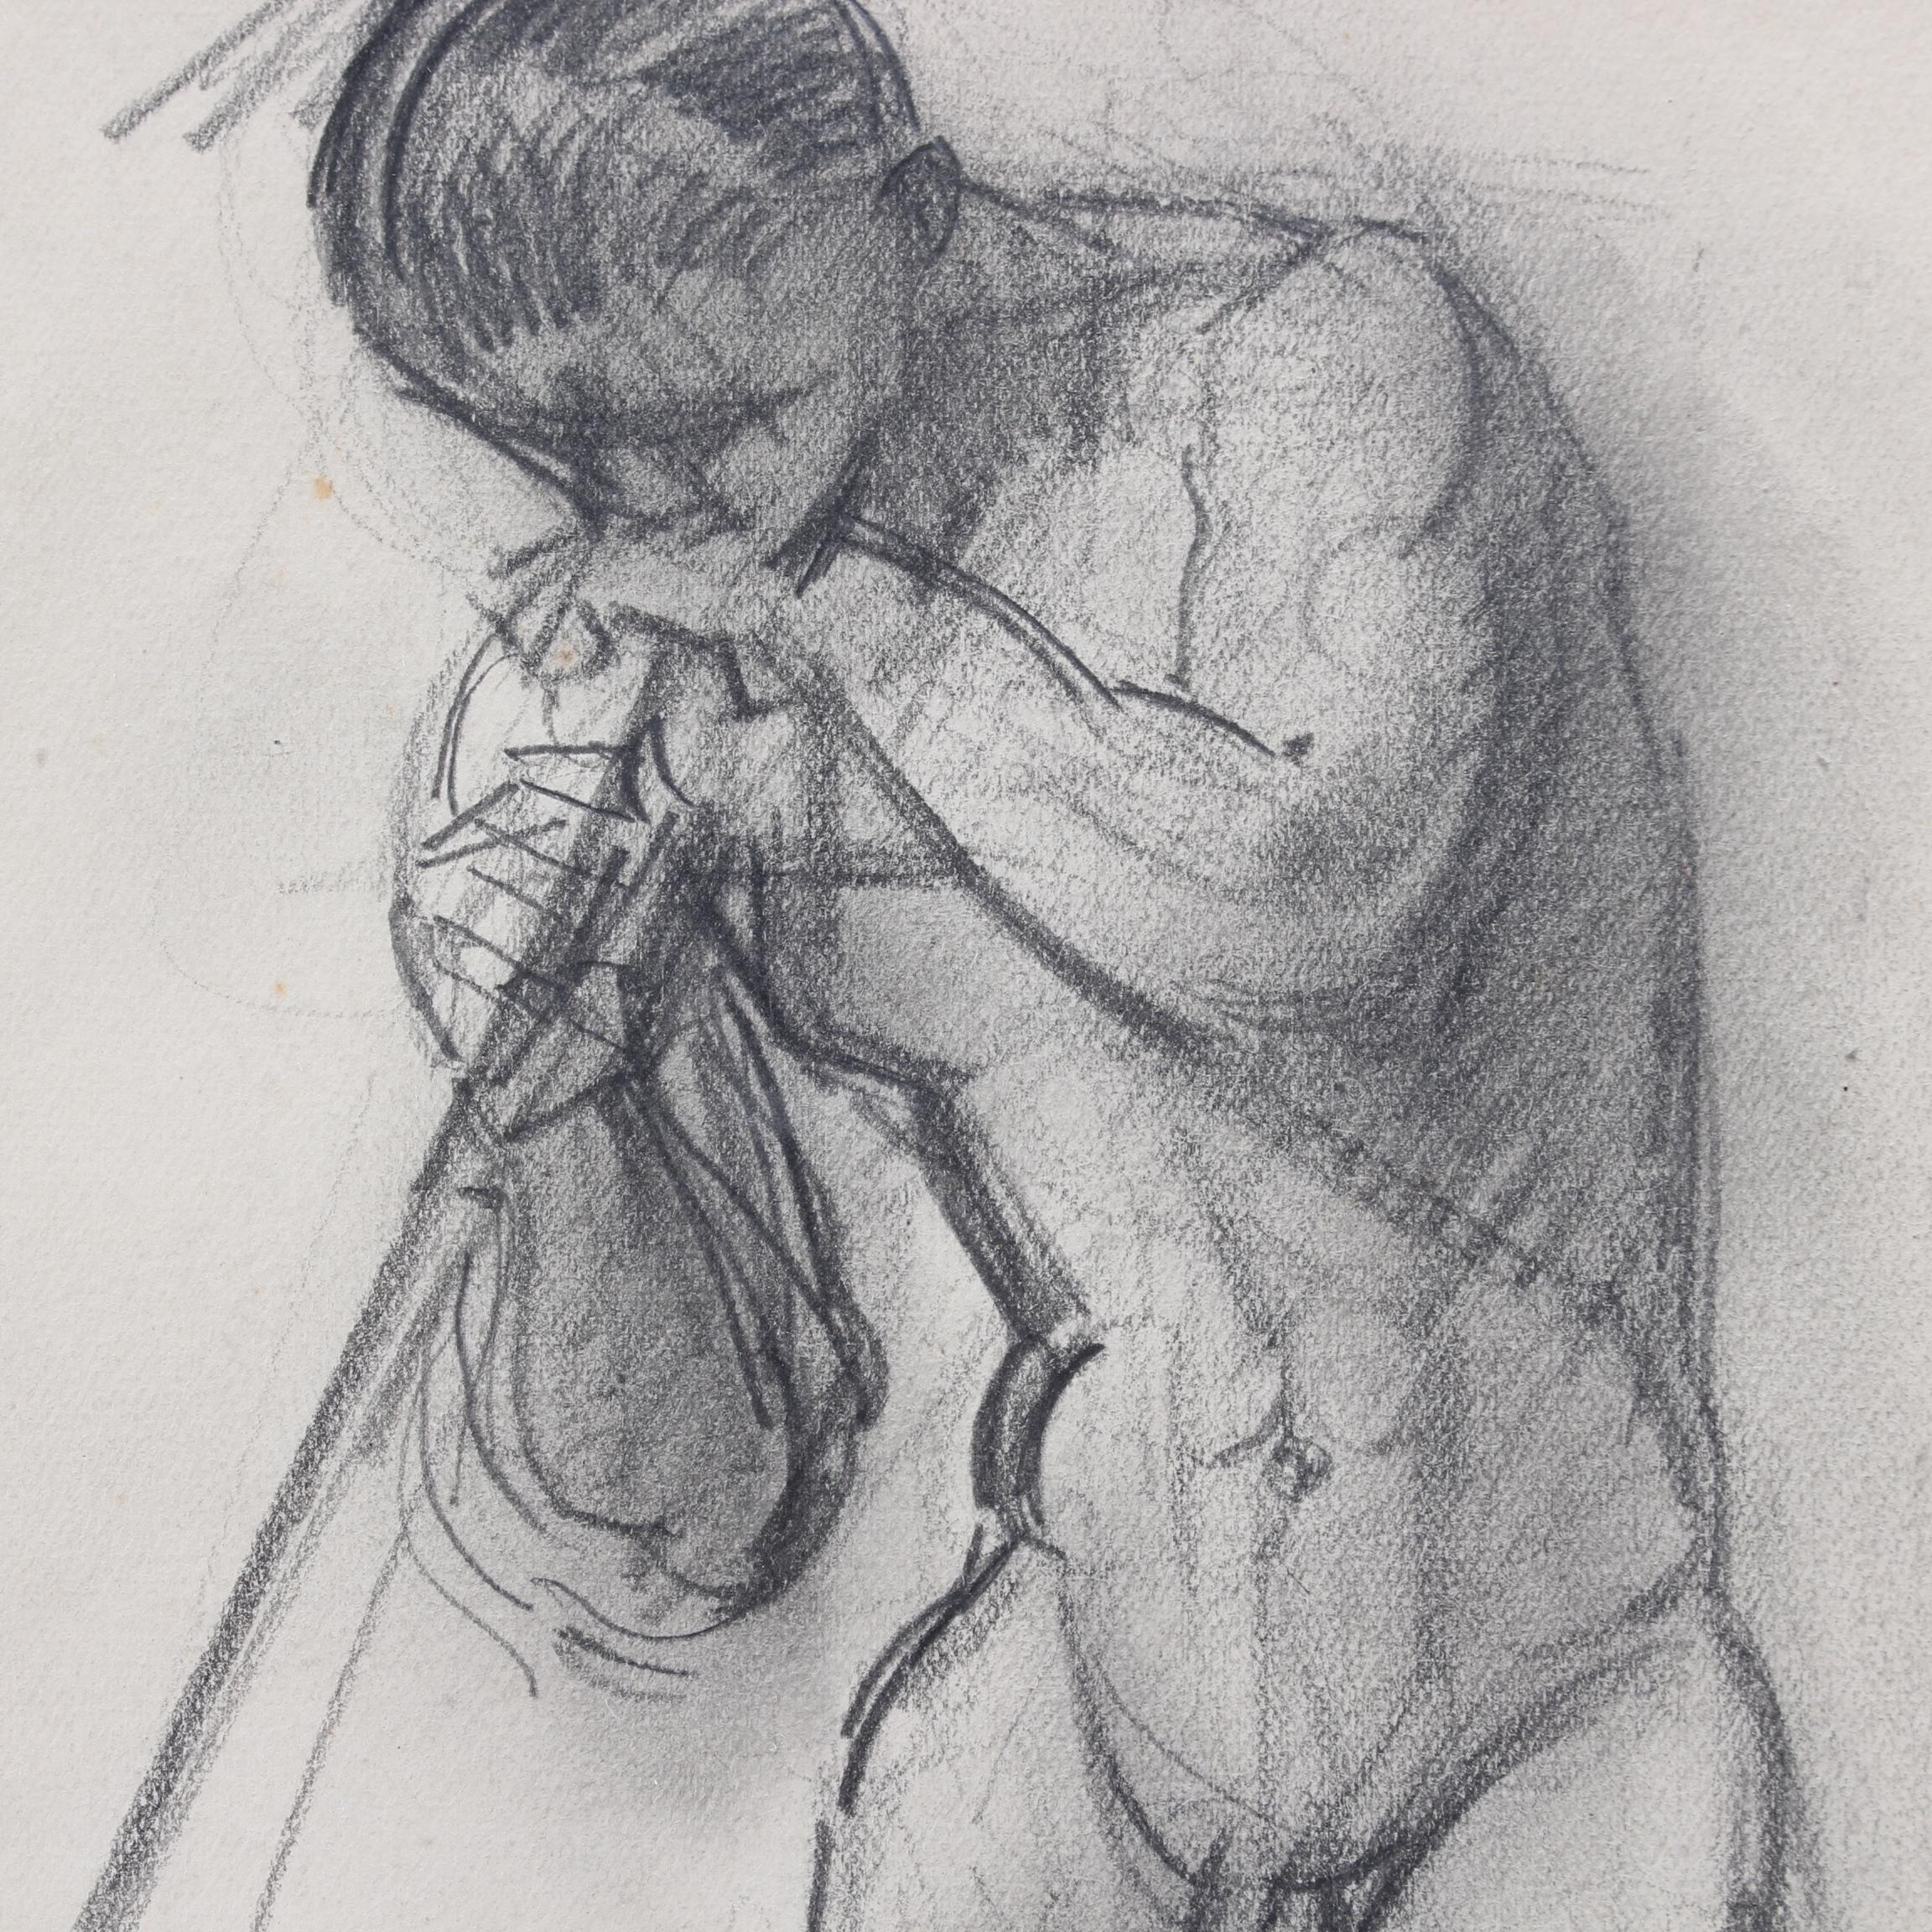 'The Glassblower', charcoal on fine art paper, by Guillaume Dulac (circa 1920s). An artist known for his exquisite drawings - many are sketches for his larger oil paintings or other works - this piece is compelling because the artist achieves mood